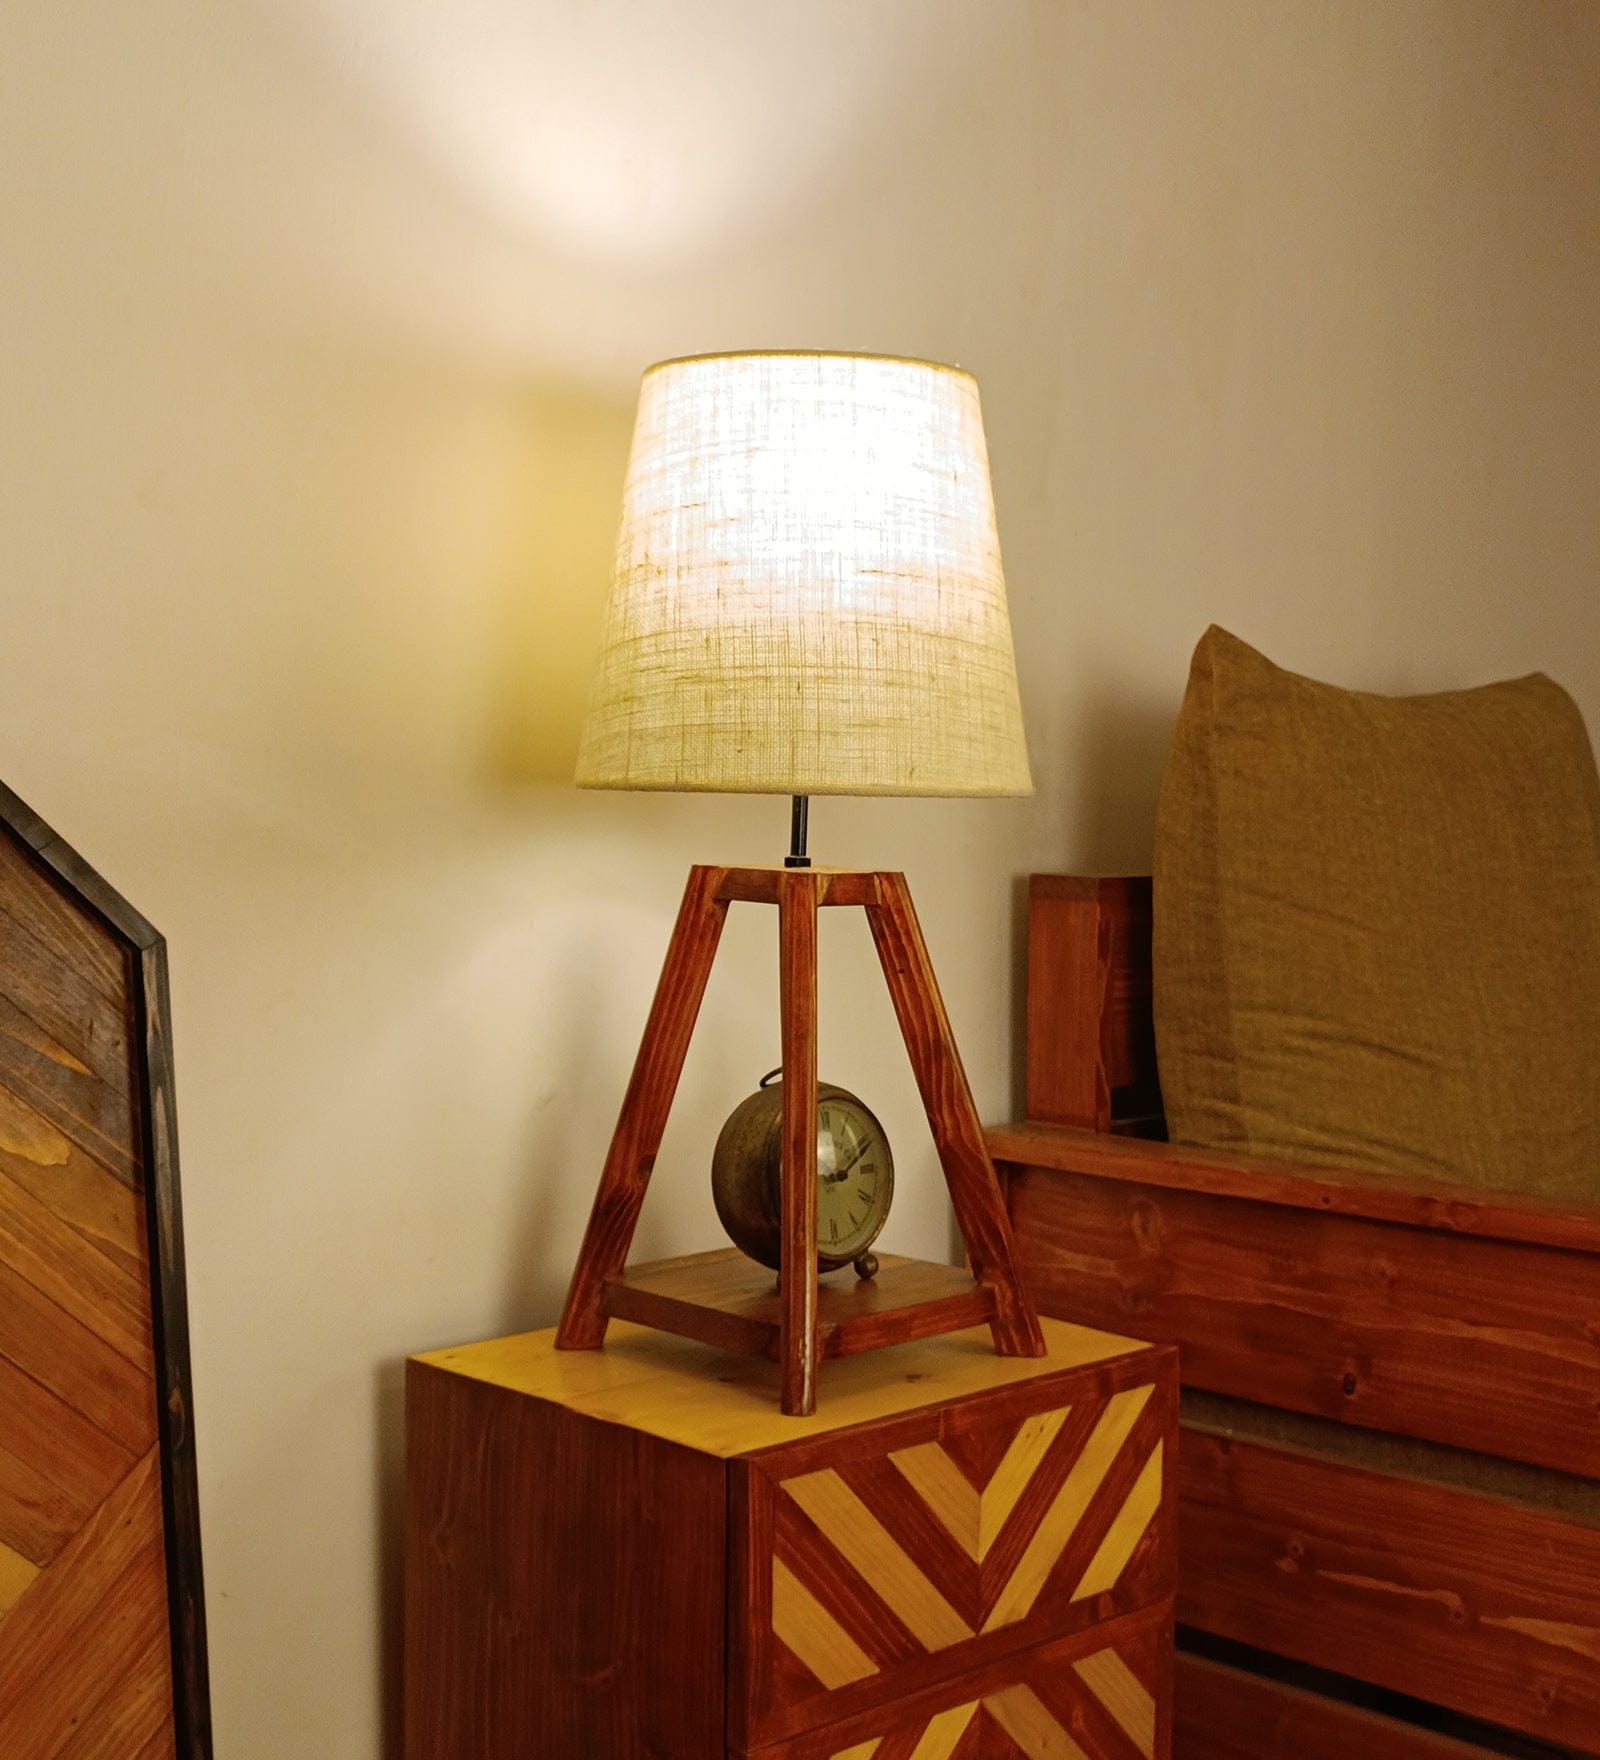 Charlotte Brown Wooden Table Lamp with White Jute Lampshade (BULB NOT INCLUDED)